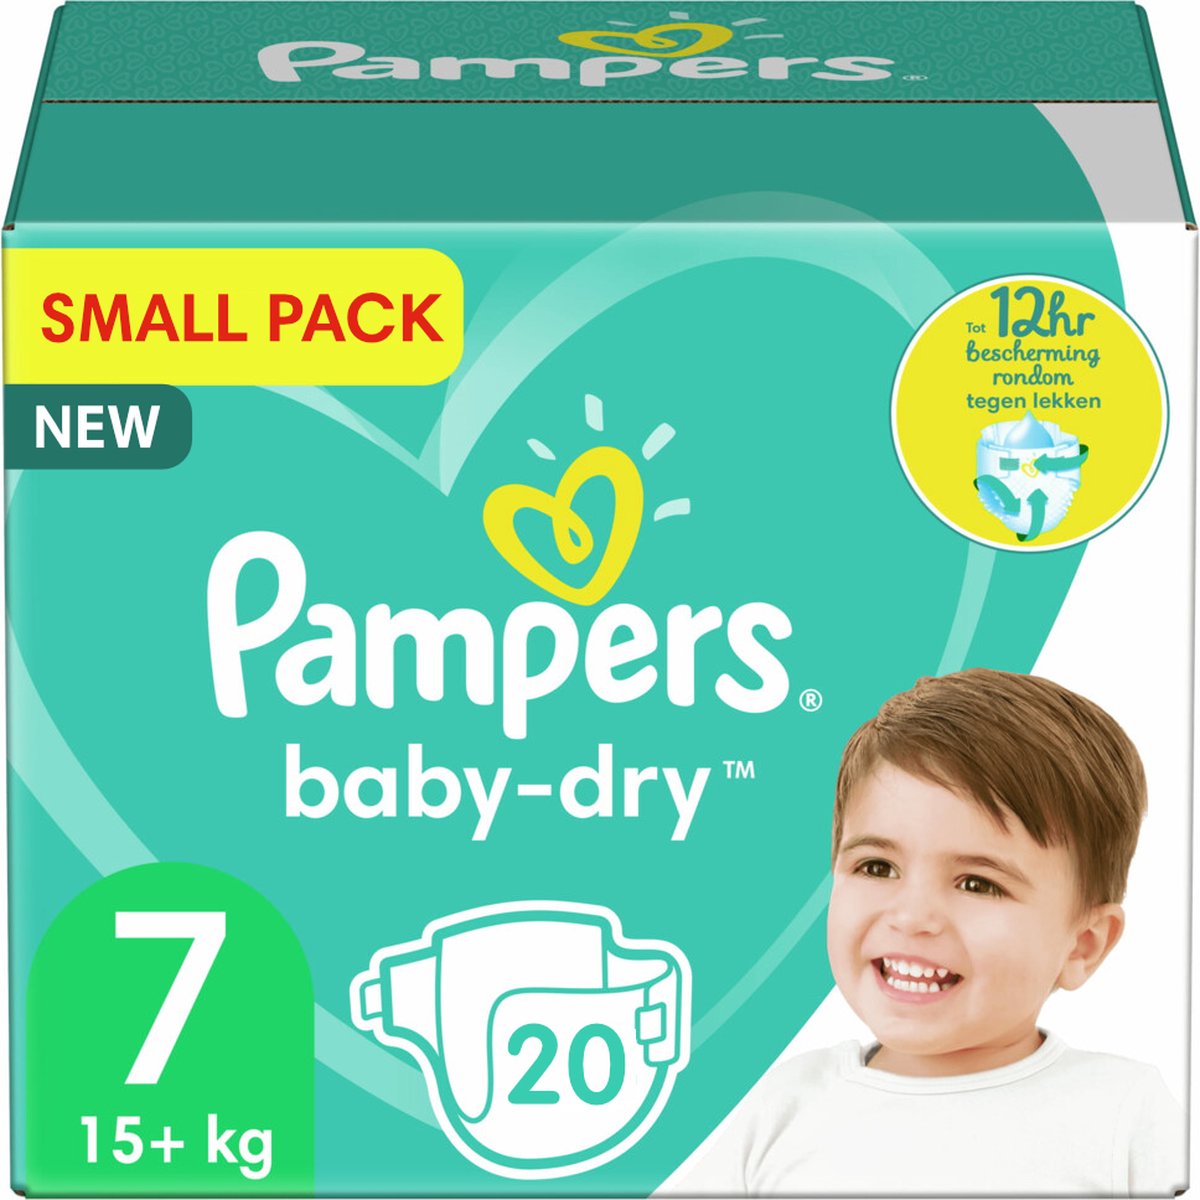 Pampers Couches Baby-Dry Taille 8 (17+ kg), 120 Couches Bébé, Pack 1 Mois -  Pampers